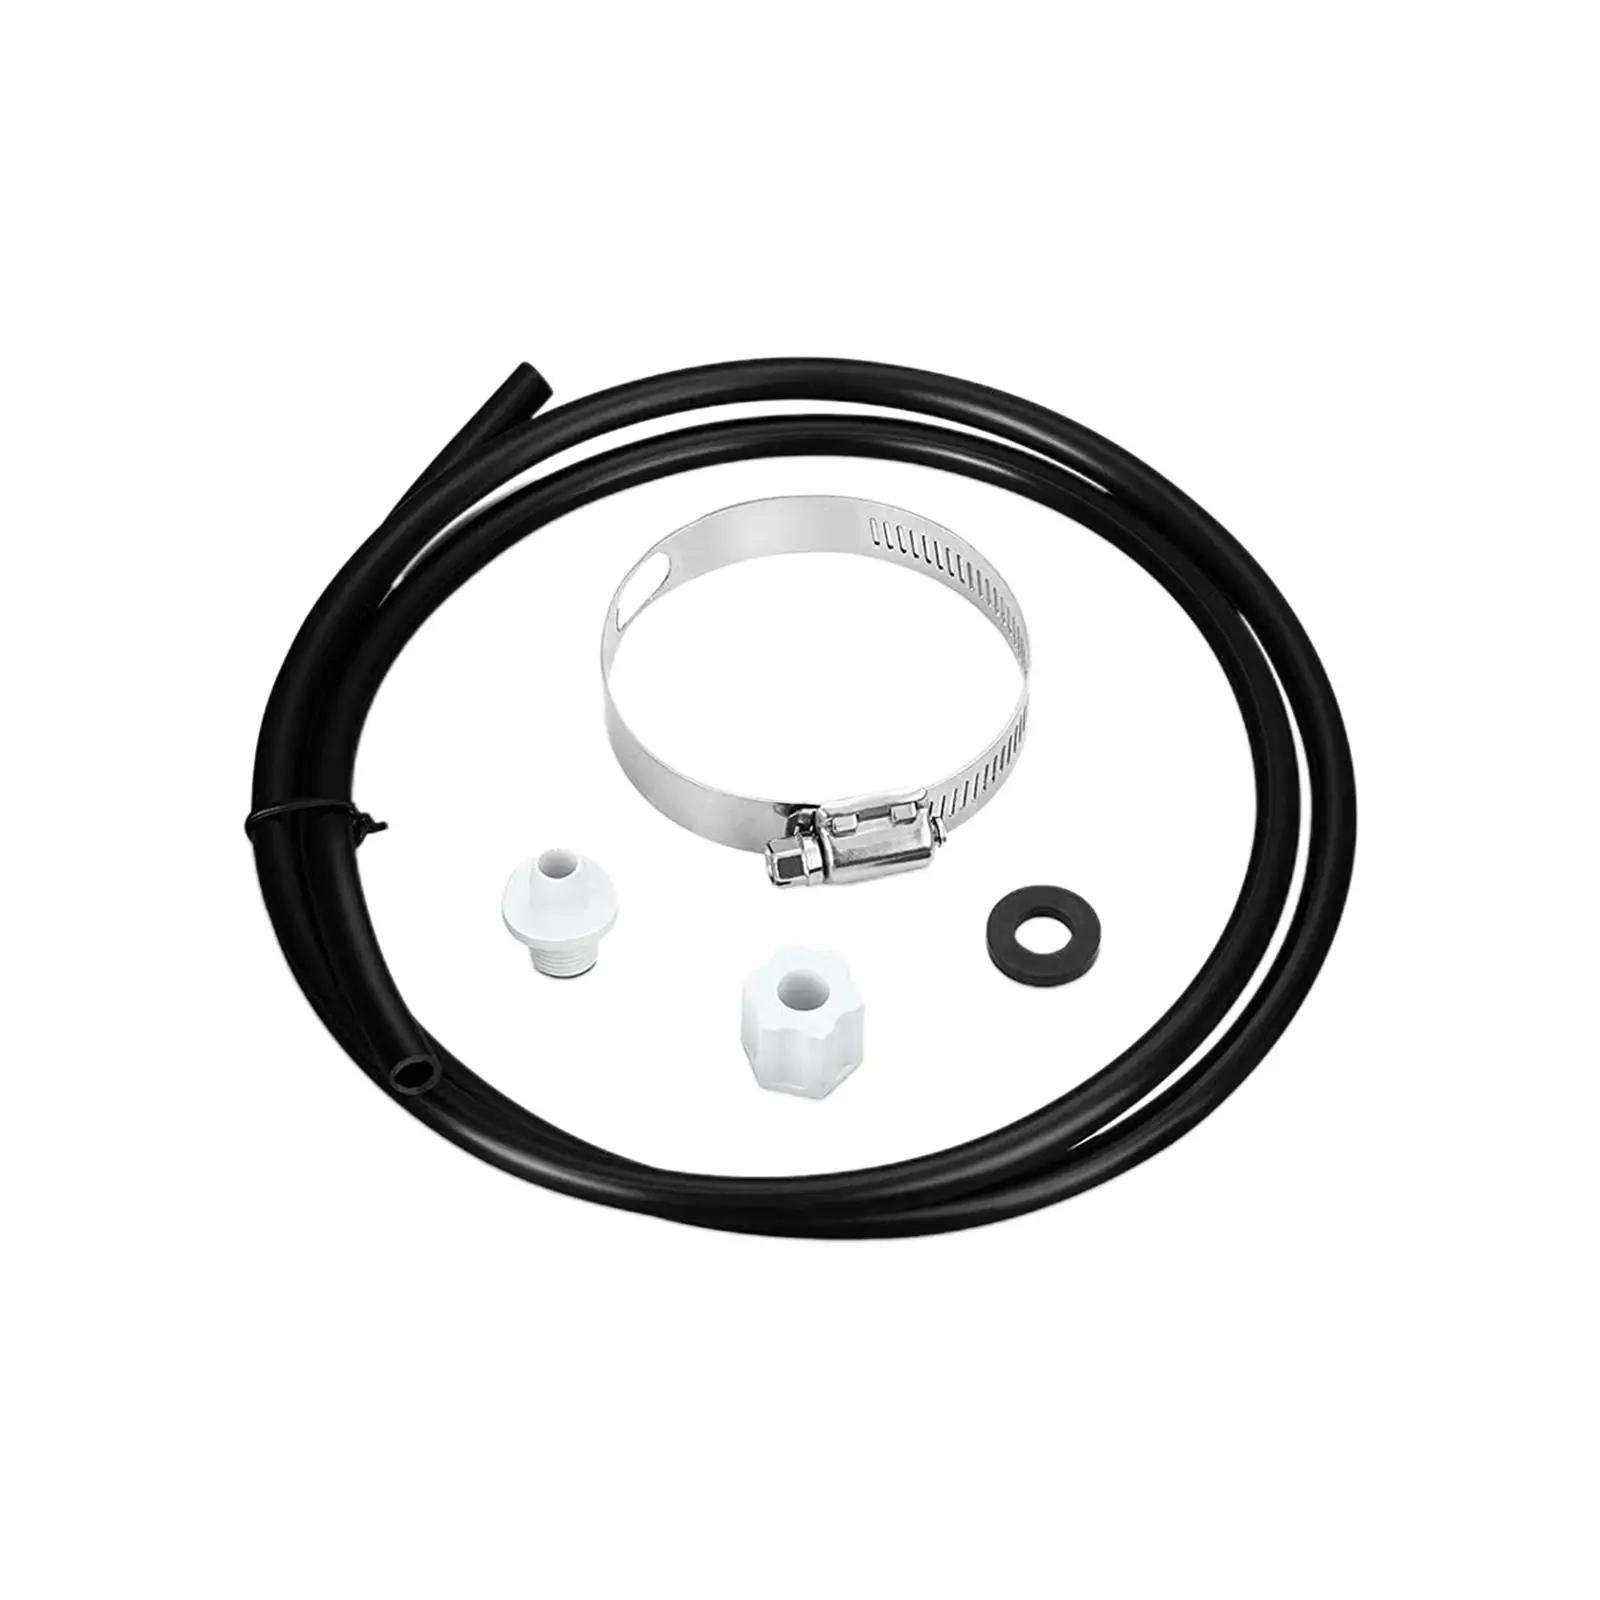 Offline Feeder Connection Pack with Saddle Clamp Chlorinator Feeder Tube 4 Feet for CL200 CL220 Offline Pool Feeder Replacement